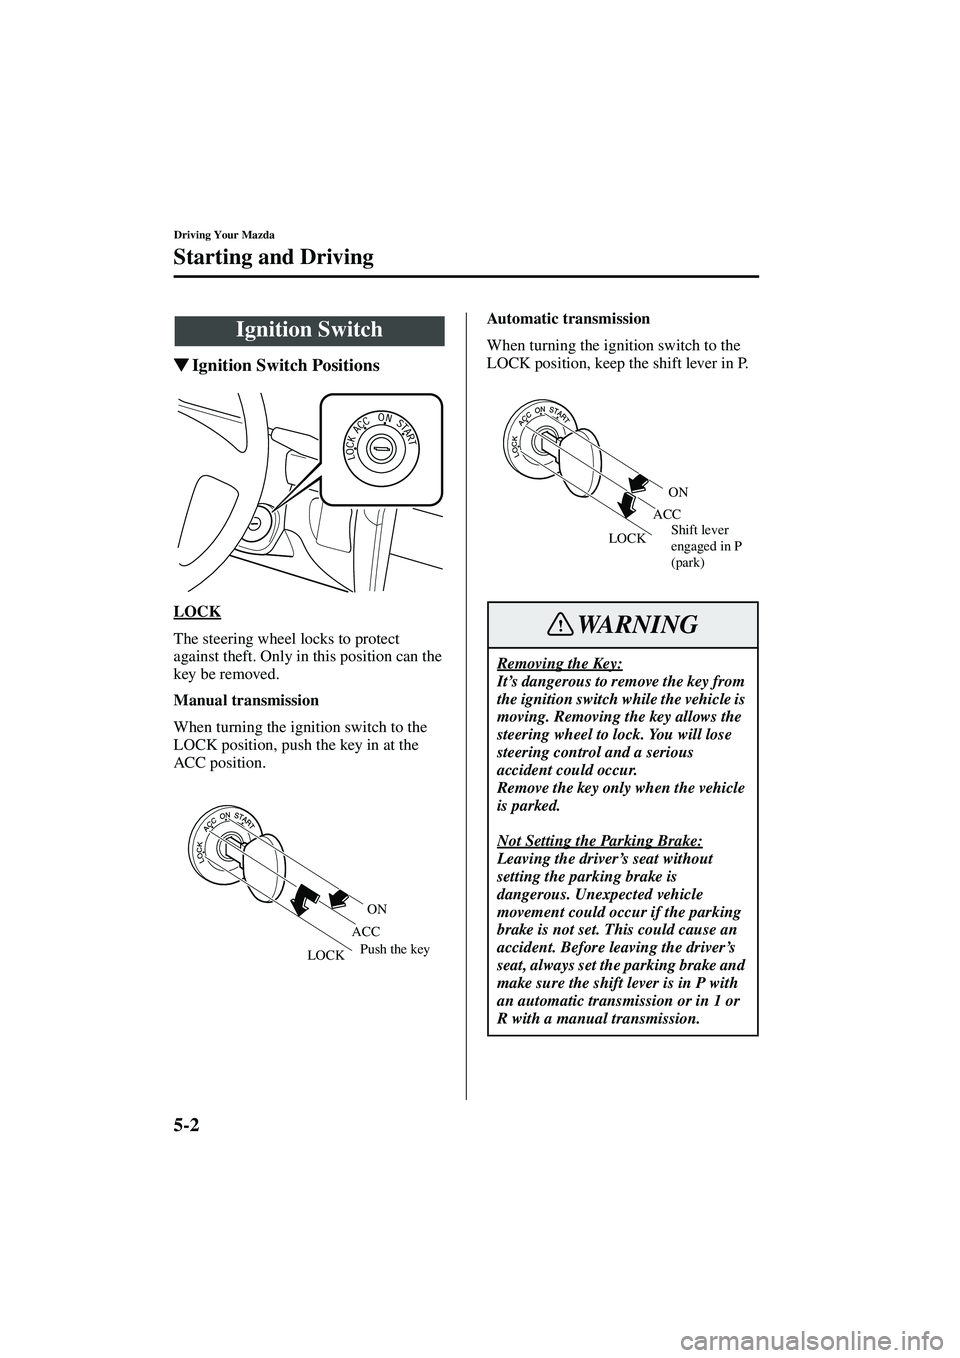 MAZDA MODEL MX-5 MIATA 2003  Owners Manual 5-2
Driving Your Mazda
Form No. 8R09-EA-02G
Starting and Driving
Ignition Switch Positions
LOCK
The steering wheel locks to protect 
against theft. Only in this position can the 
key be removed.
Manu